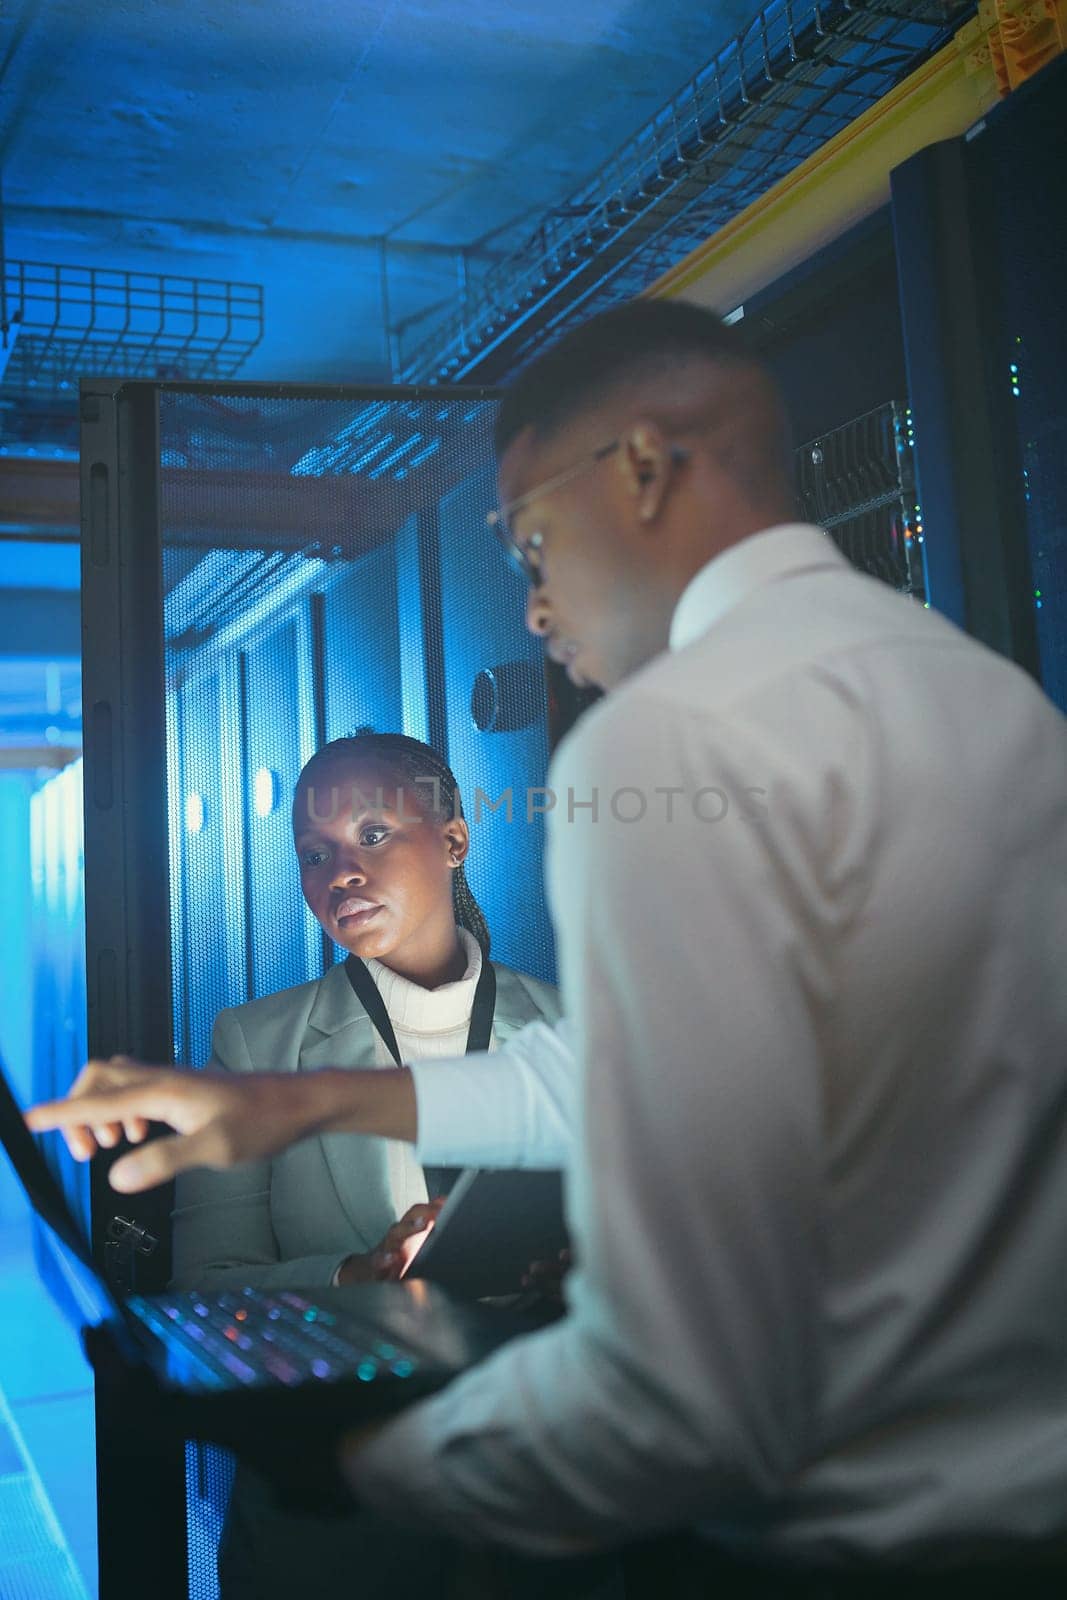 Were suffering from low download speeds. two young IT specialists standing in the server room and having a discussion while using a technology